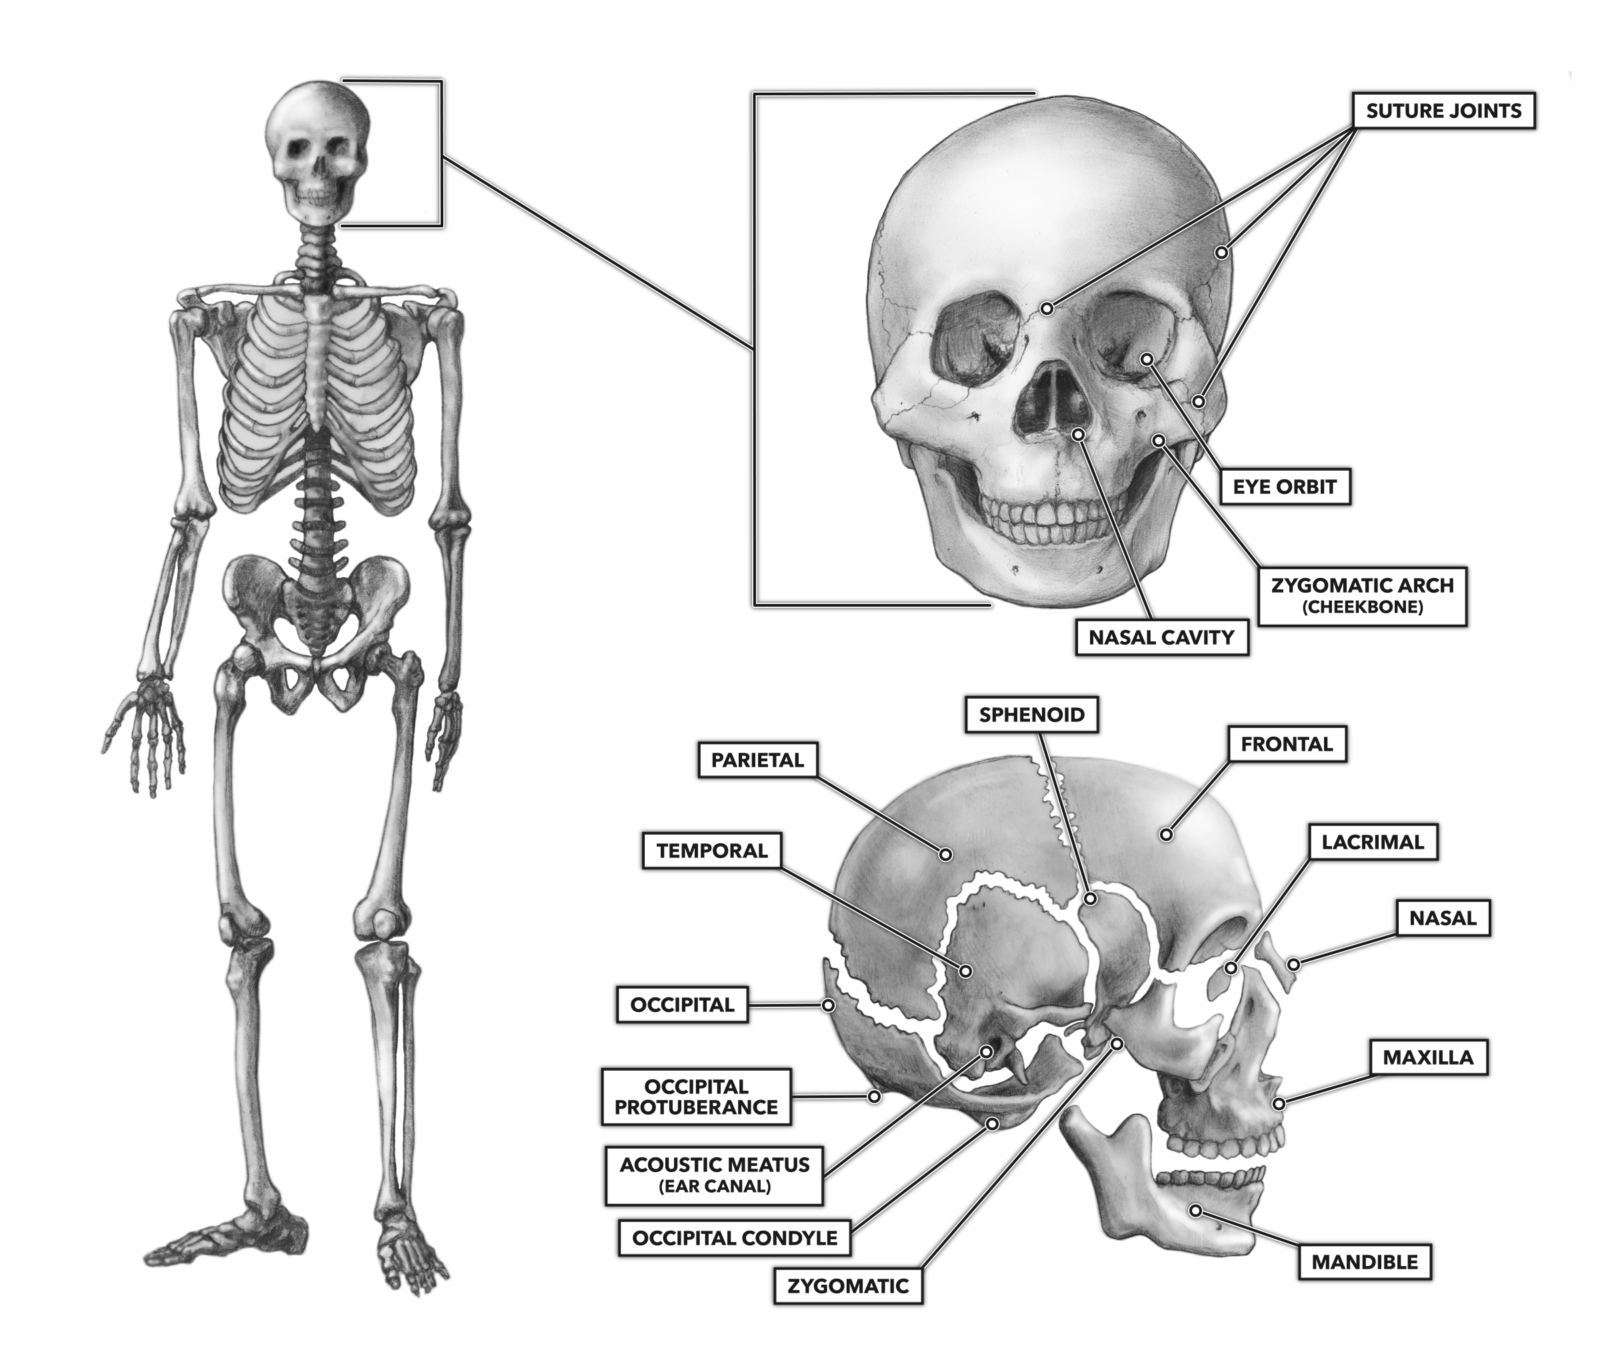 When Do The Bones In A Skull Develop For Babies?